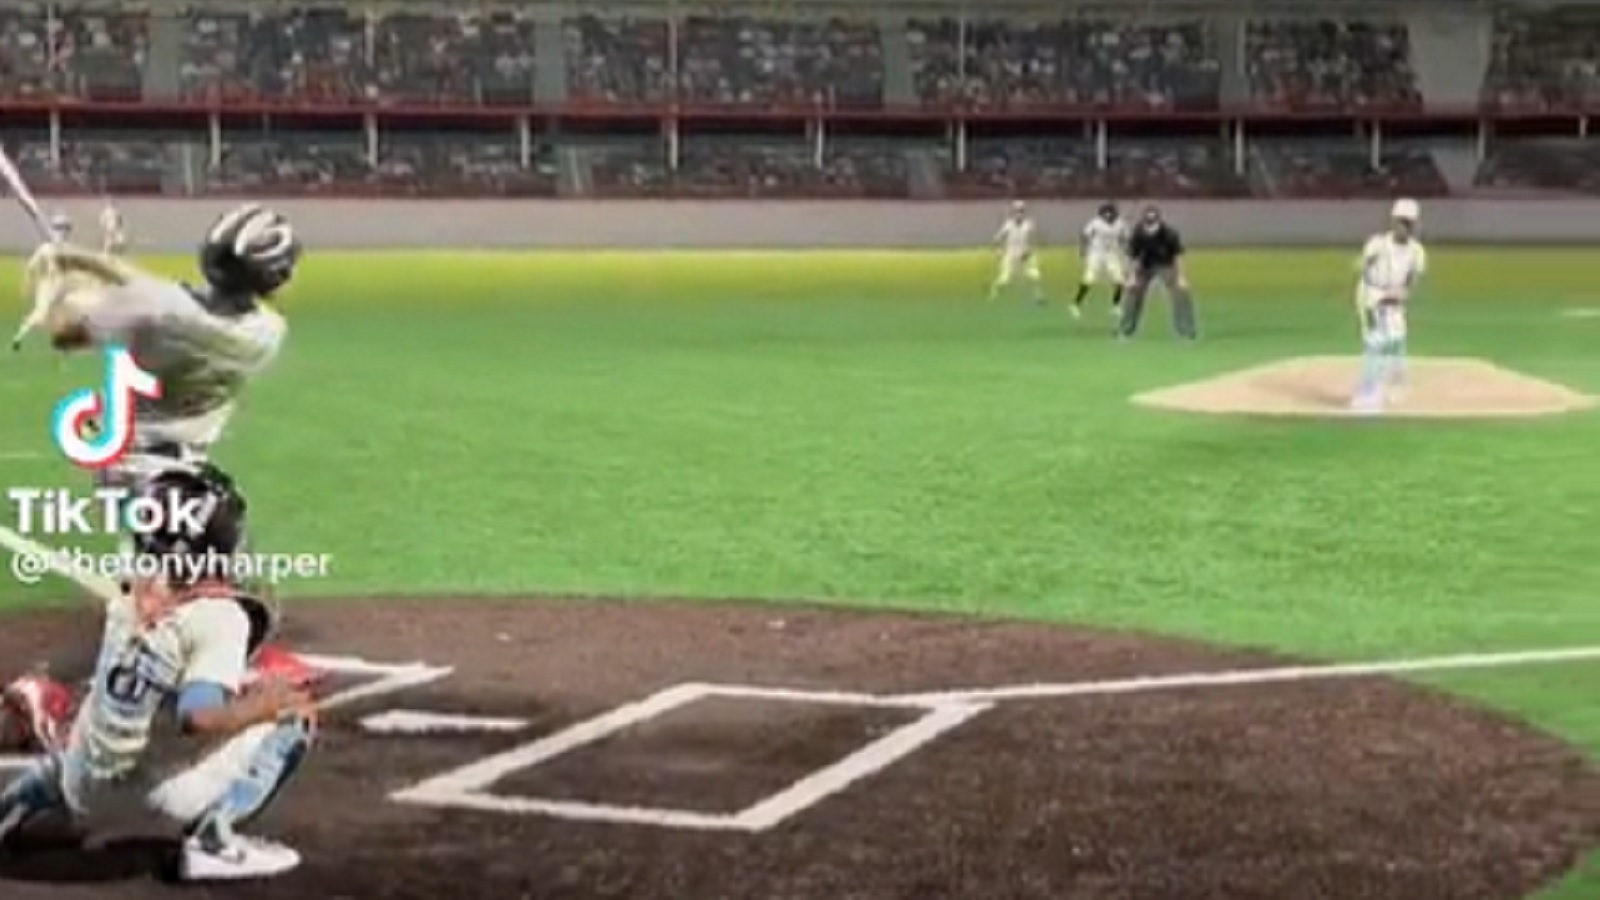 Miguel Cabrera's 11U Travel Ball Son Is Better Than Your Travel